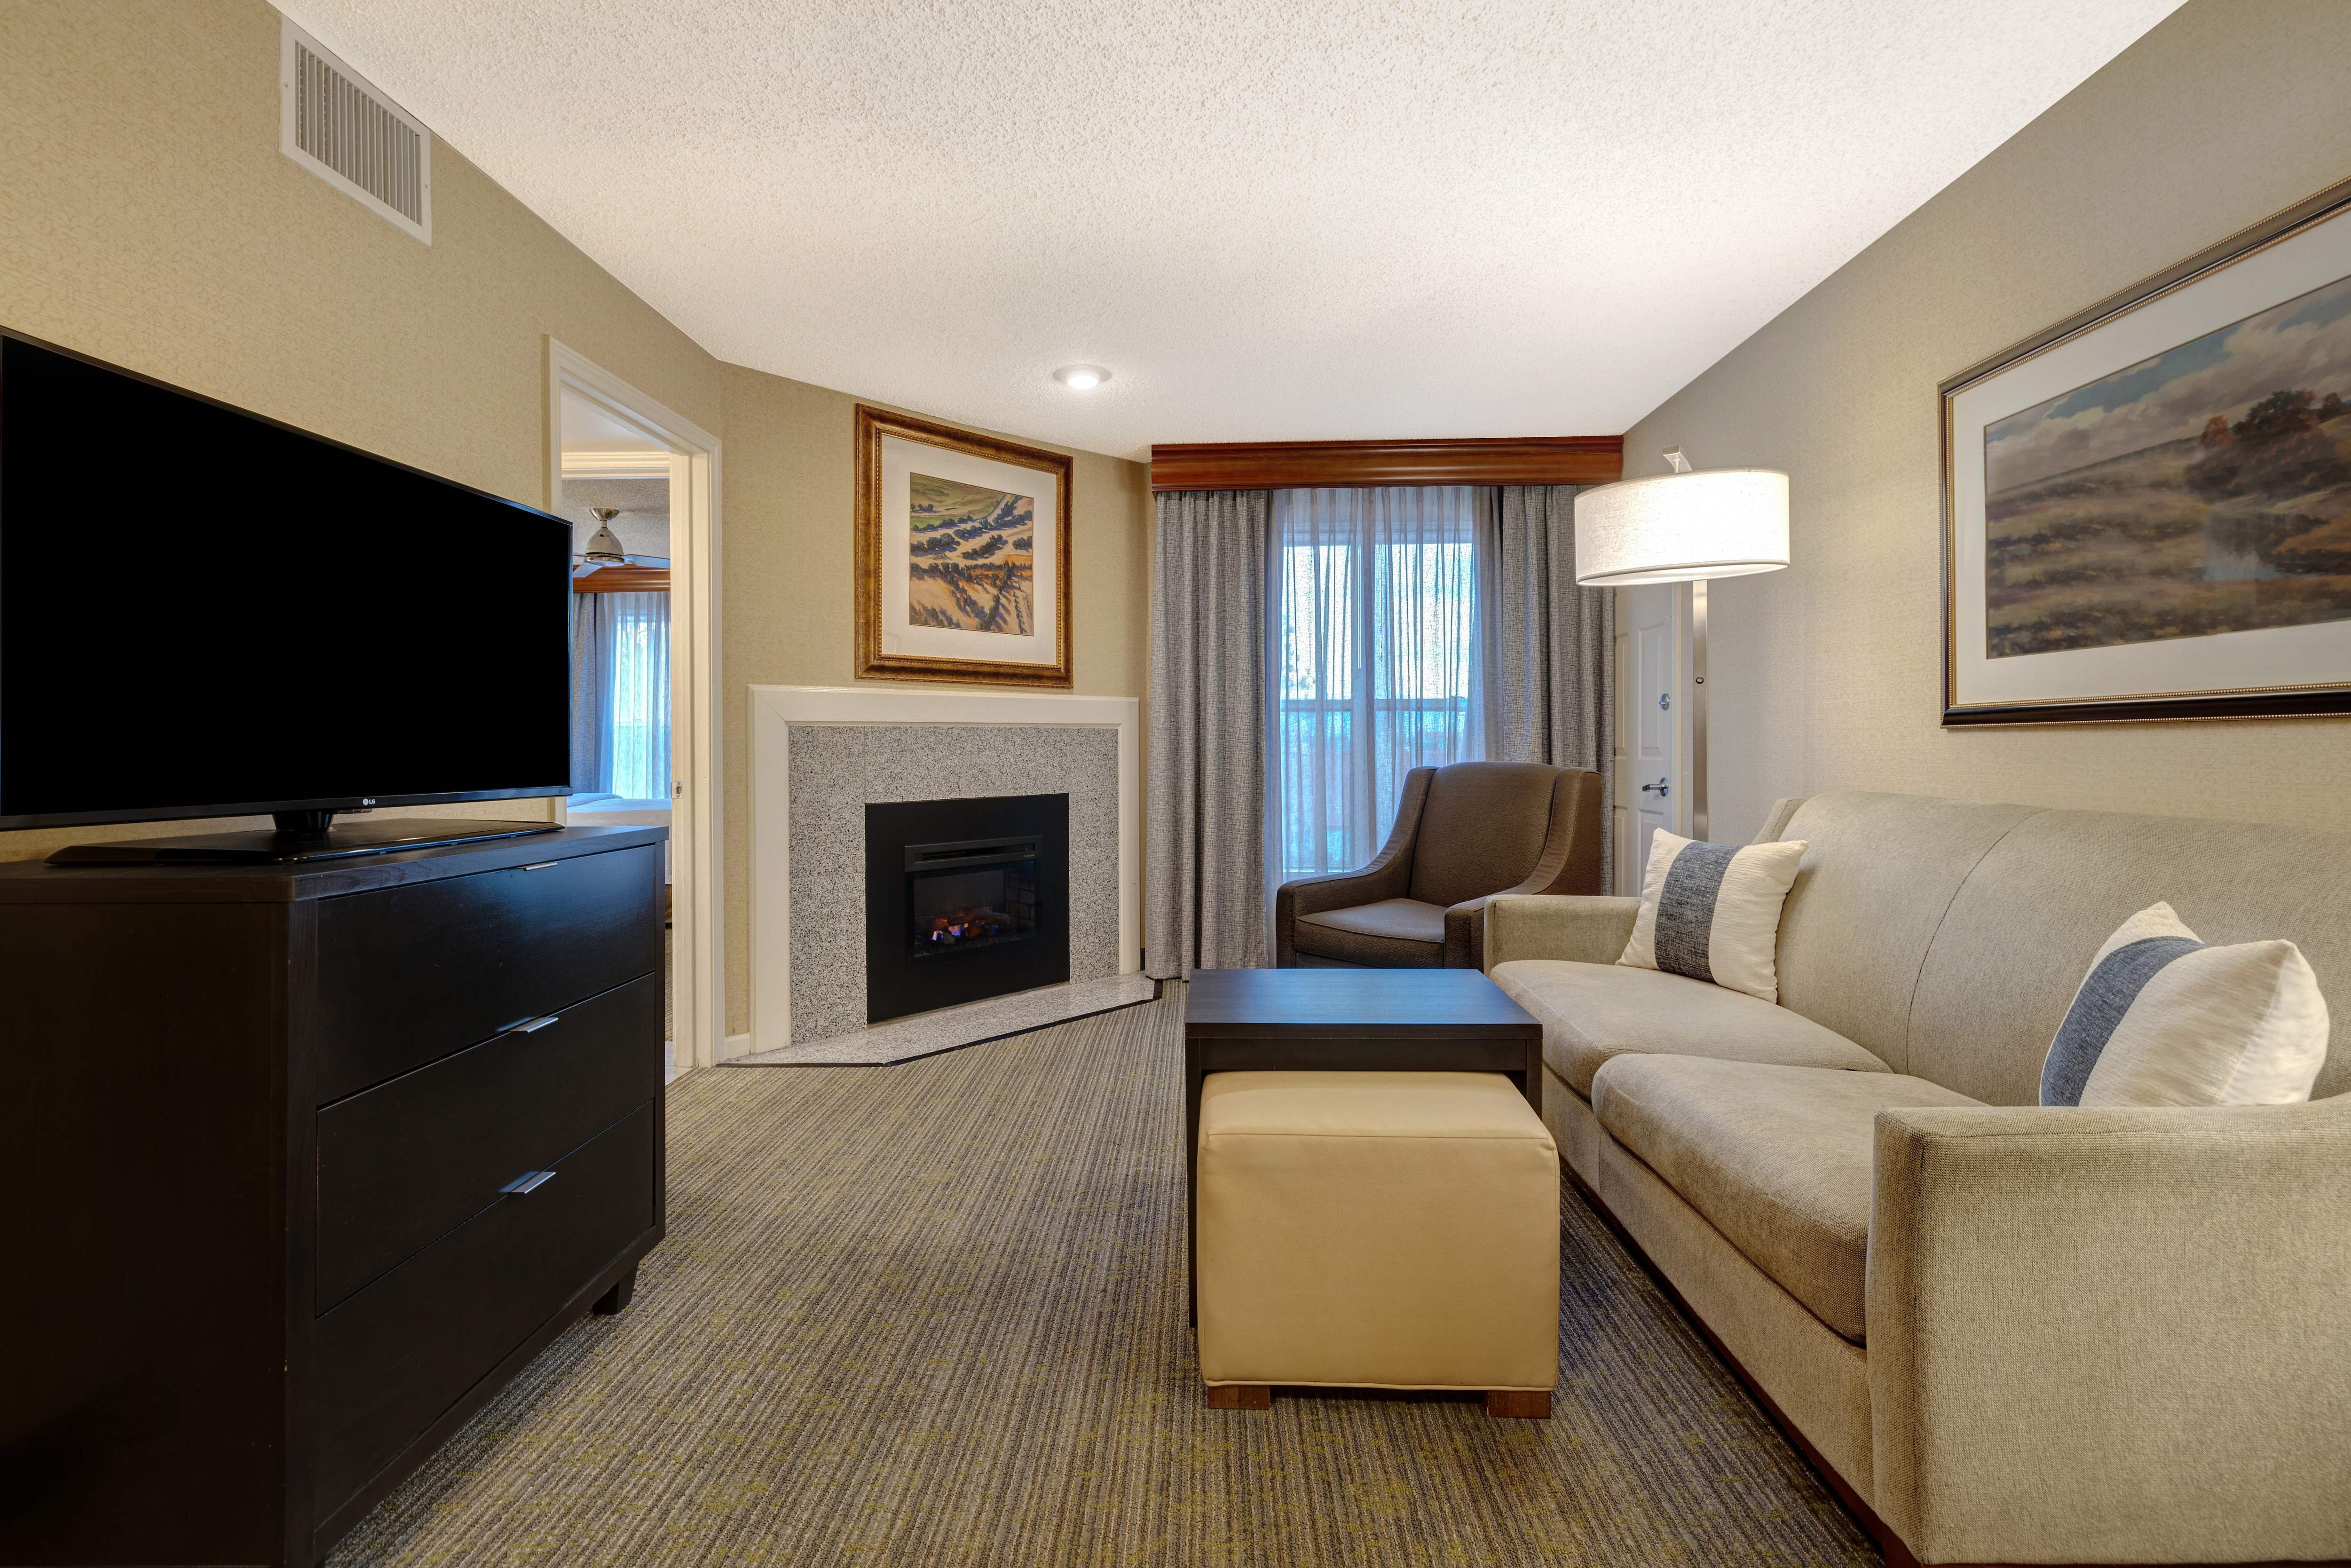 guest room lounge area with tv fireplace and window